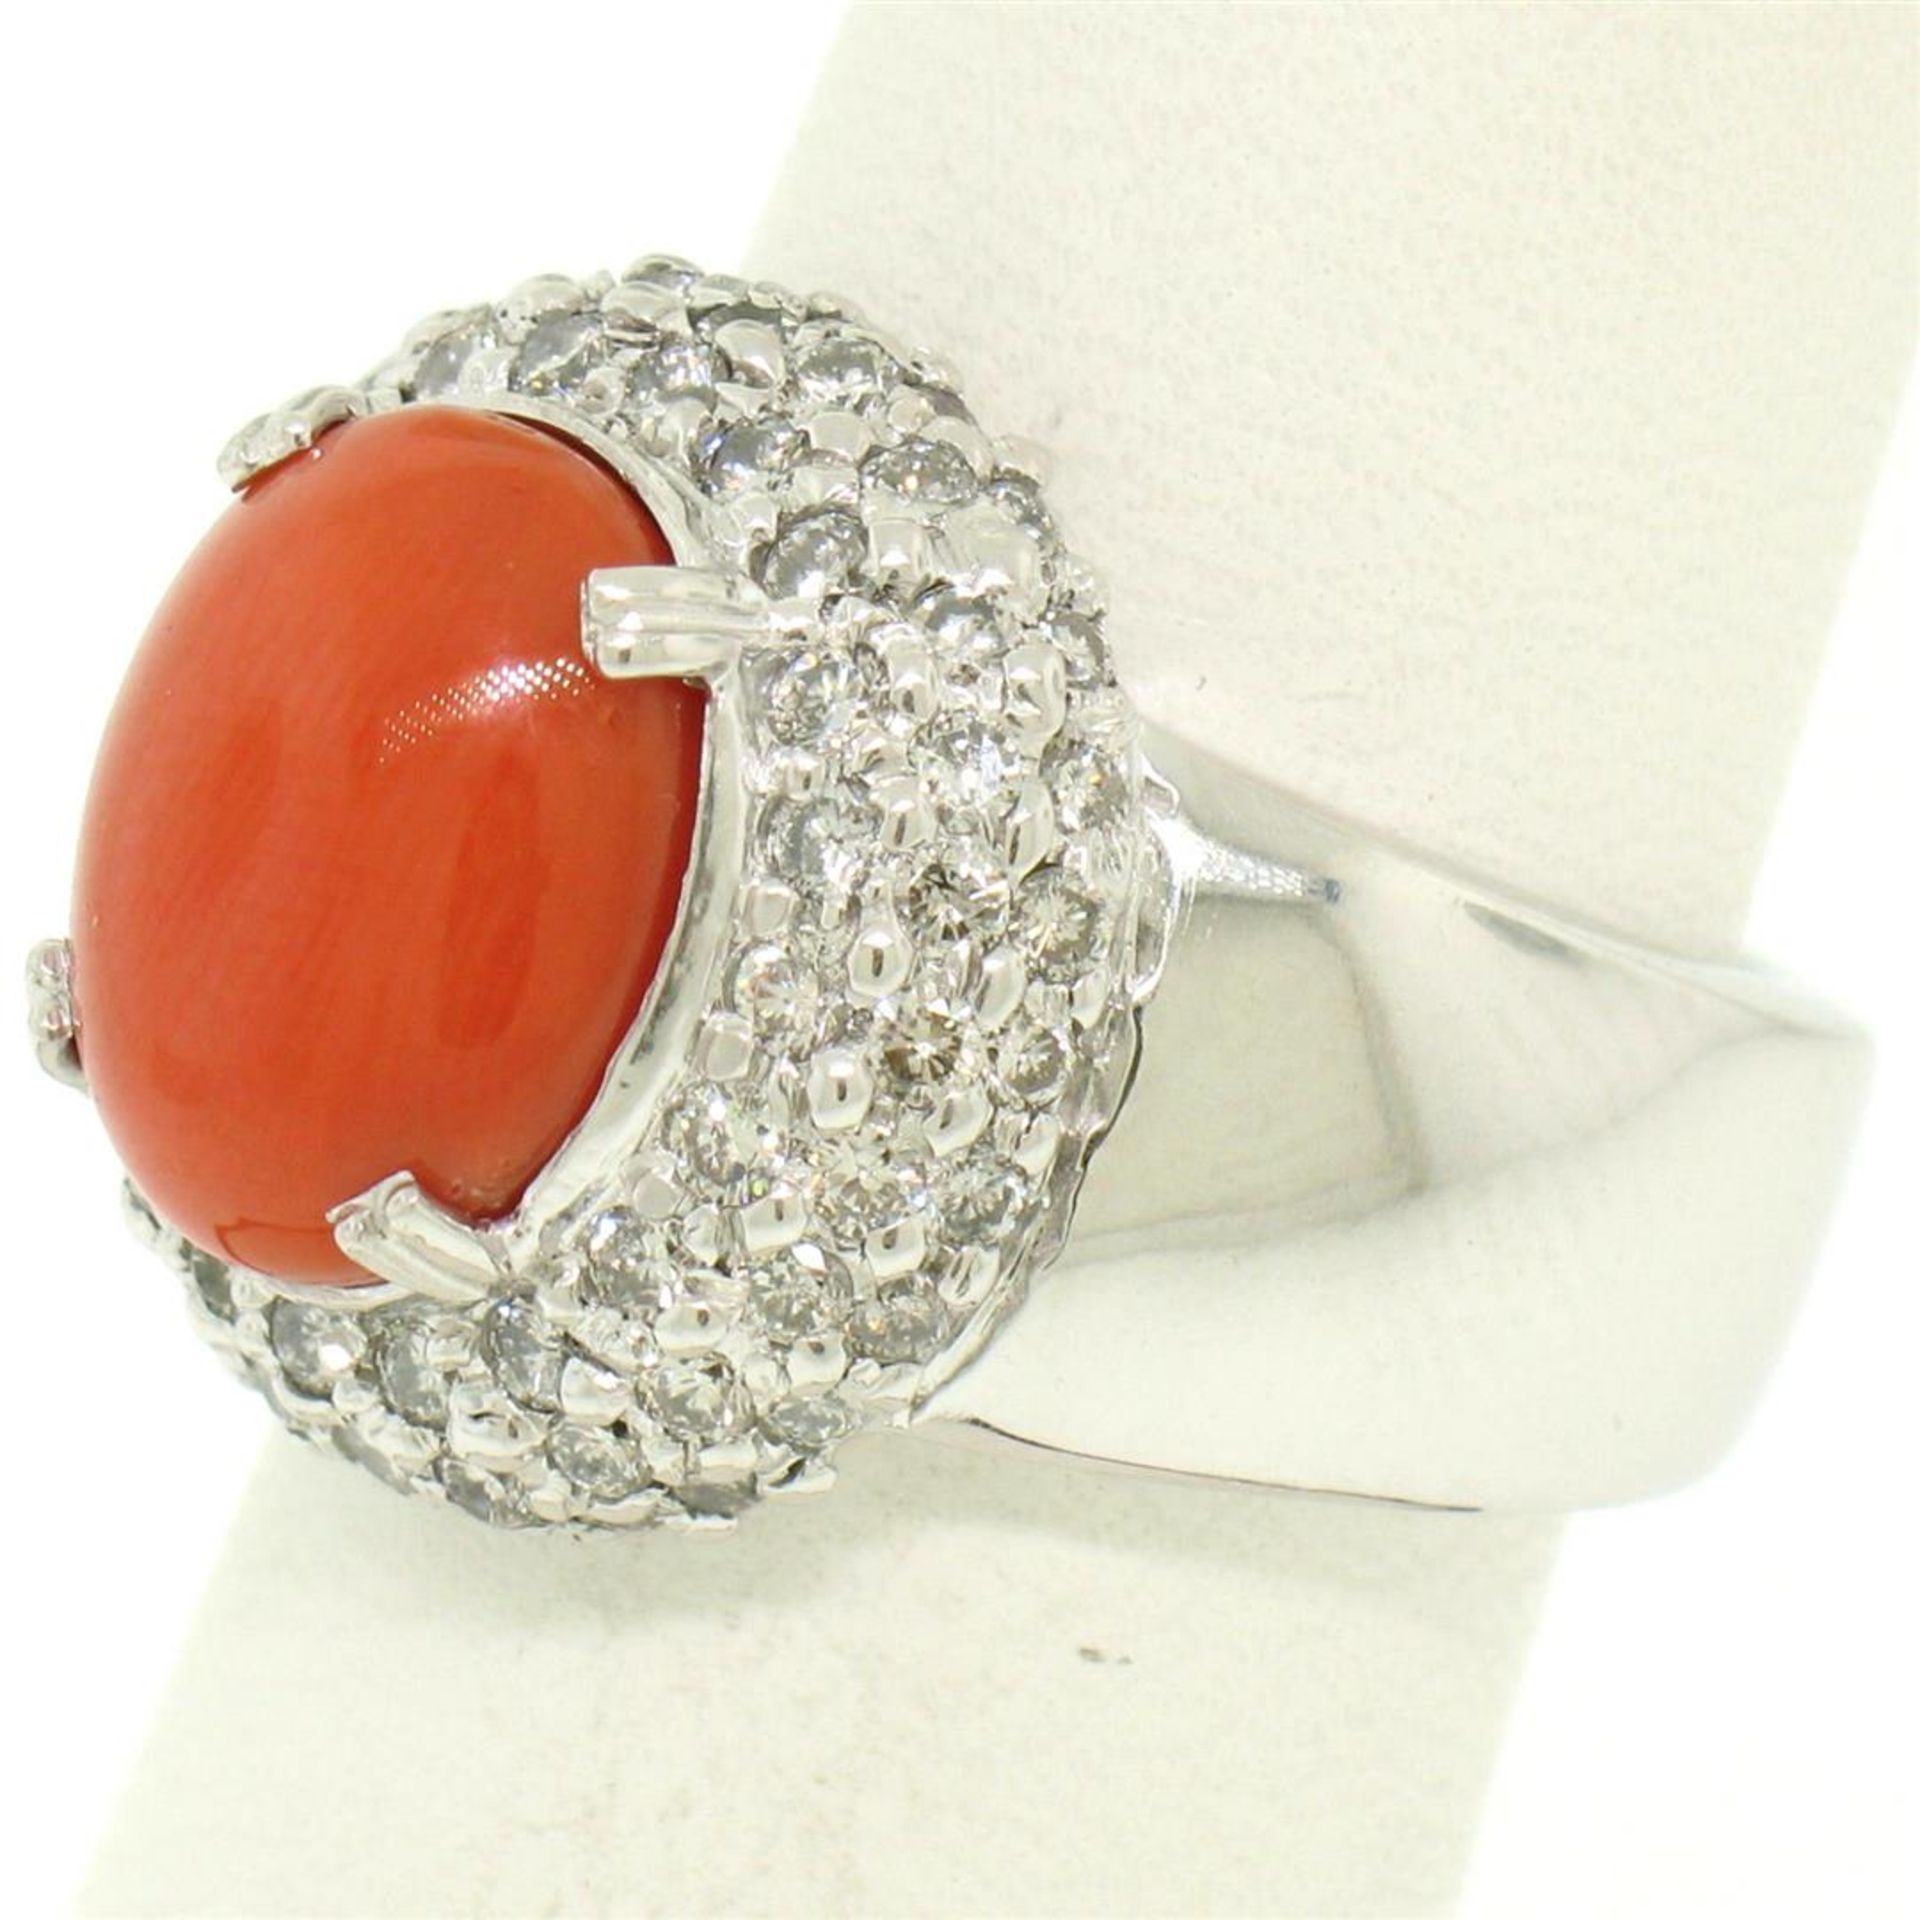 14kt White Gold Oval Cabochon Red Coral Ring w/ 2.10ctw Diamond Halo - Image 2 of 8